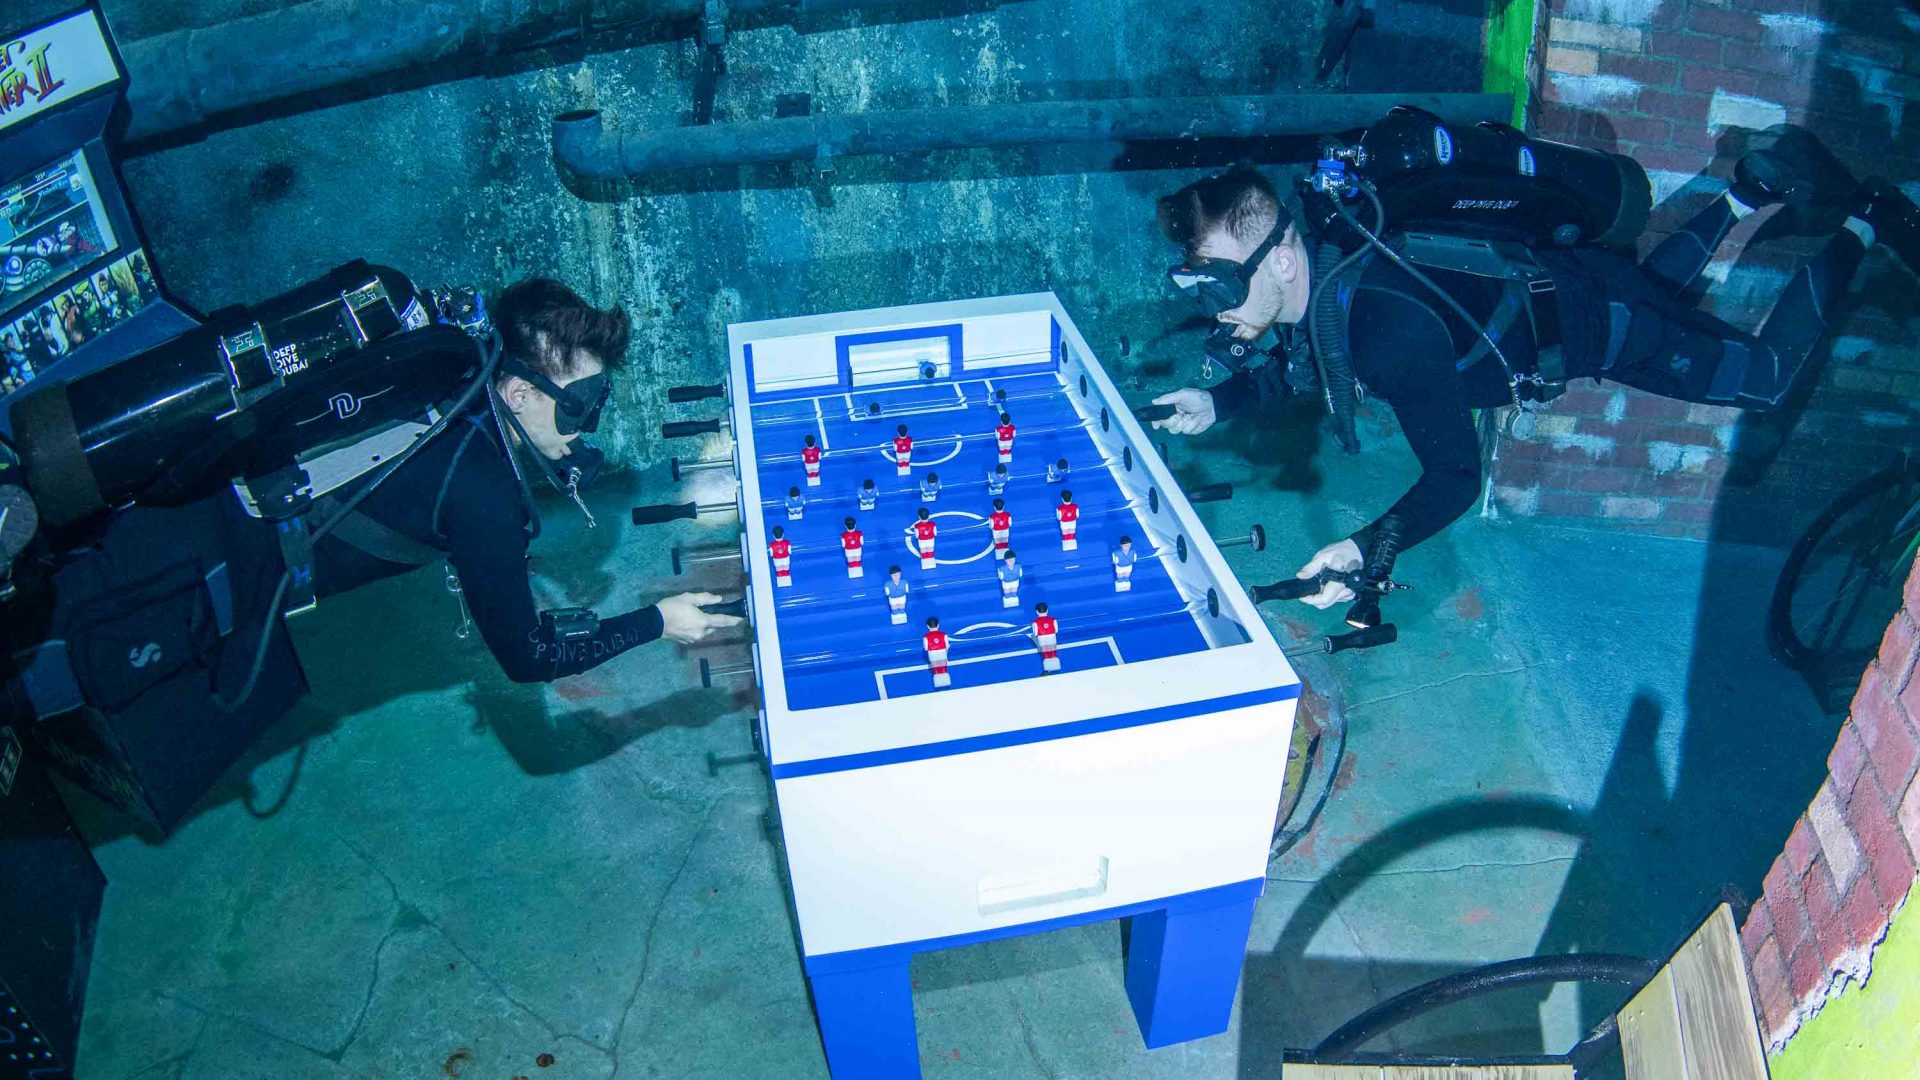 Two divers play an underwater game of foosball or table football.